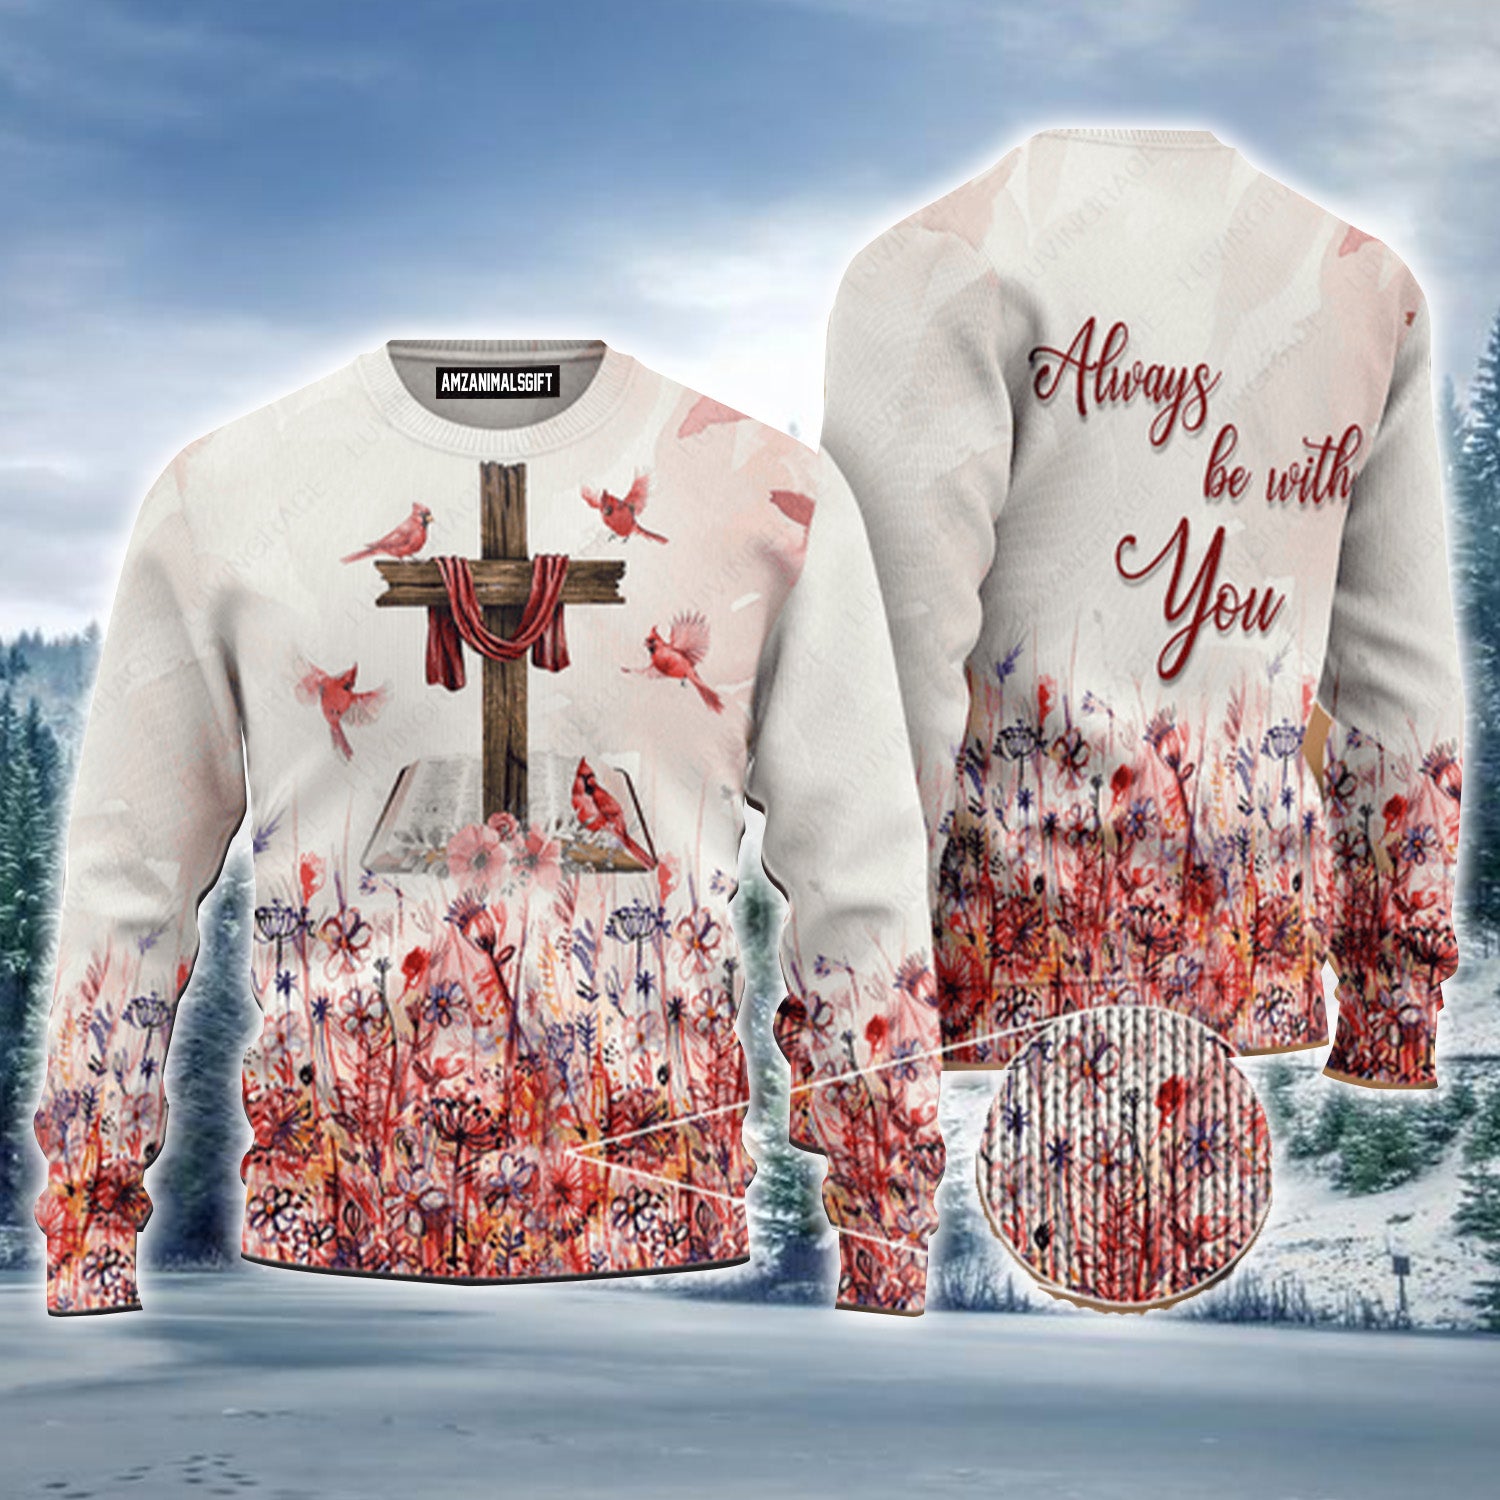 Christmas Cardinal Cross Always Be With You Urly Sweater, Christmas Sweater For Men & Women - Perfect Gift For New Year, Winter, Christmas